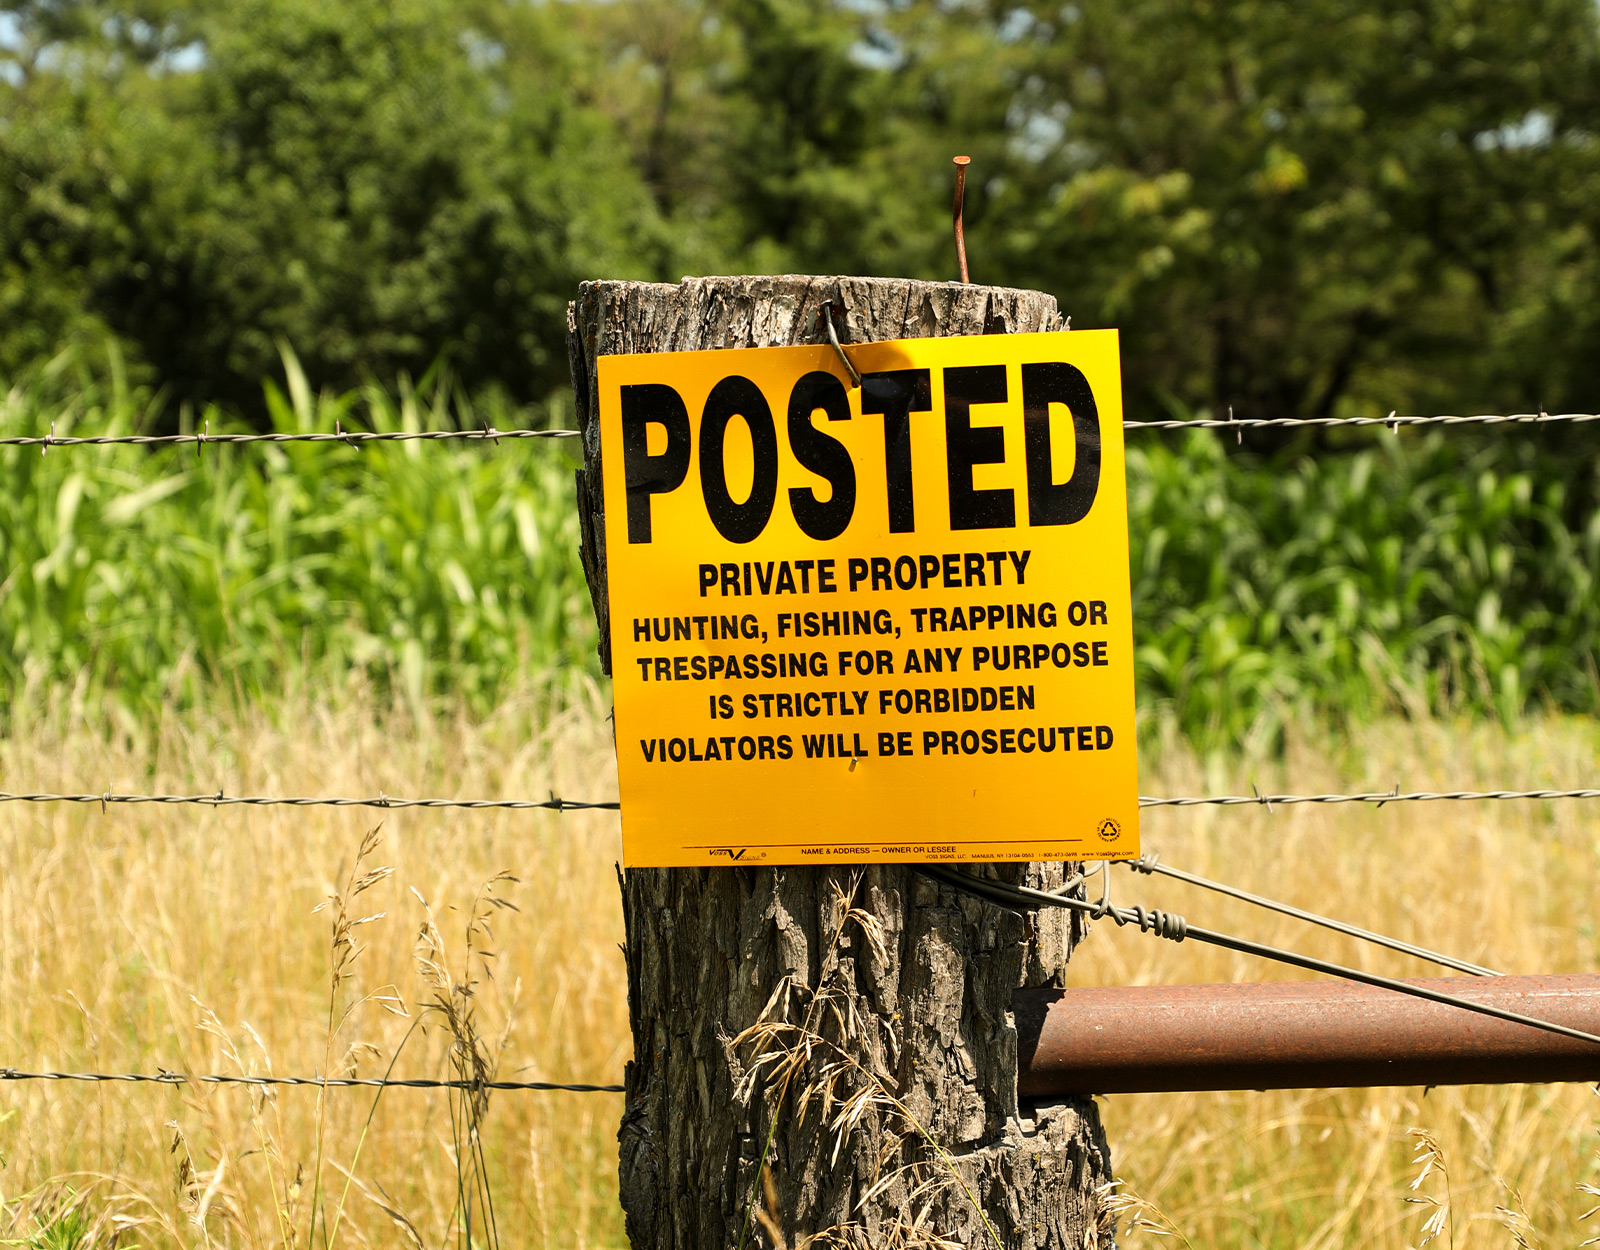 posted private property sign on wire fence